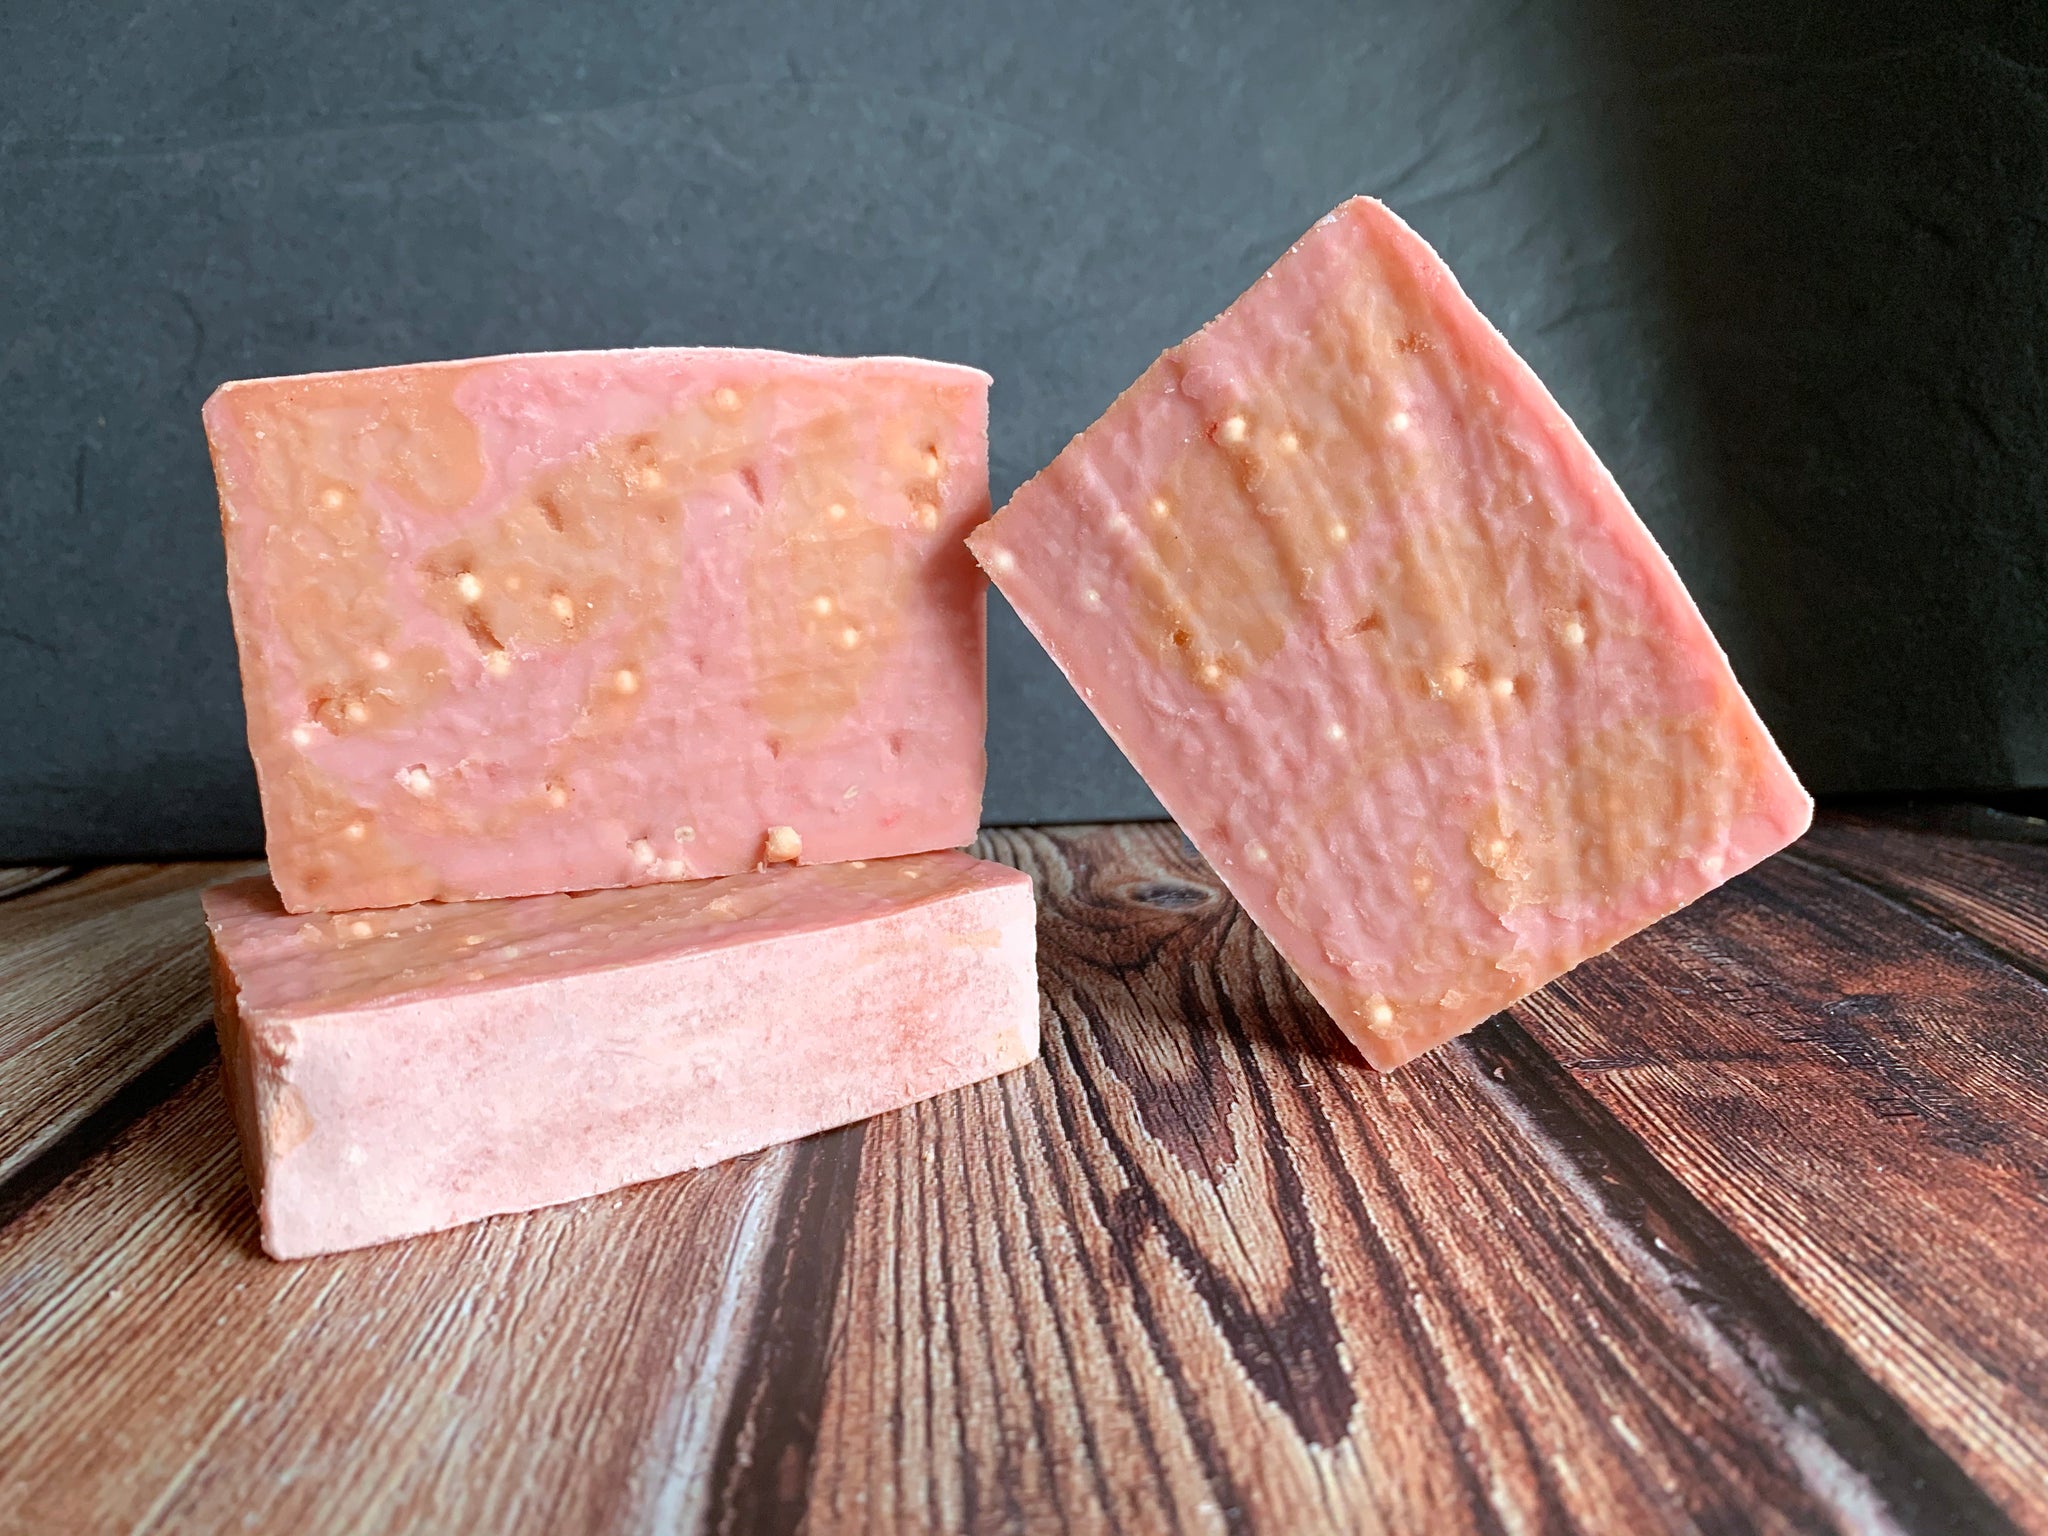 craft seltzer soap handmade in texas with peach seltzer from Austin eastciders cidery pink and orange soap for her with kaolin clay tapioca pearls